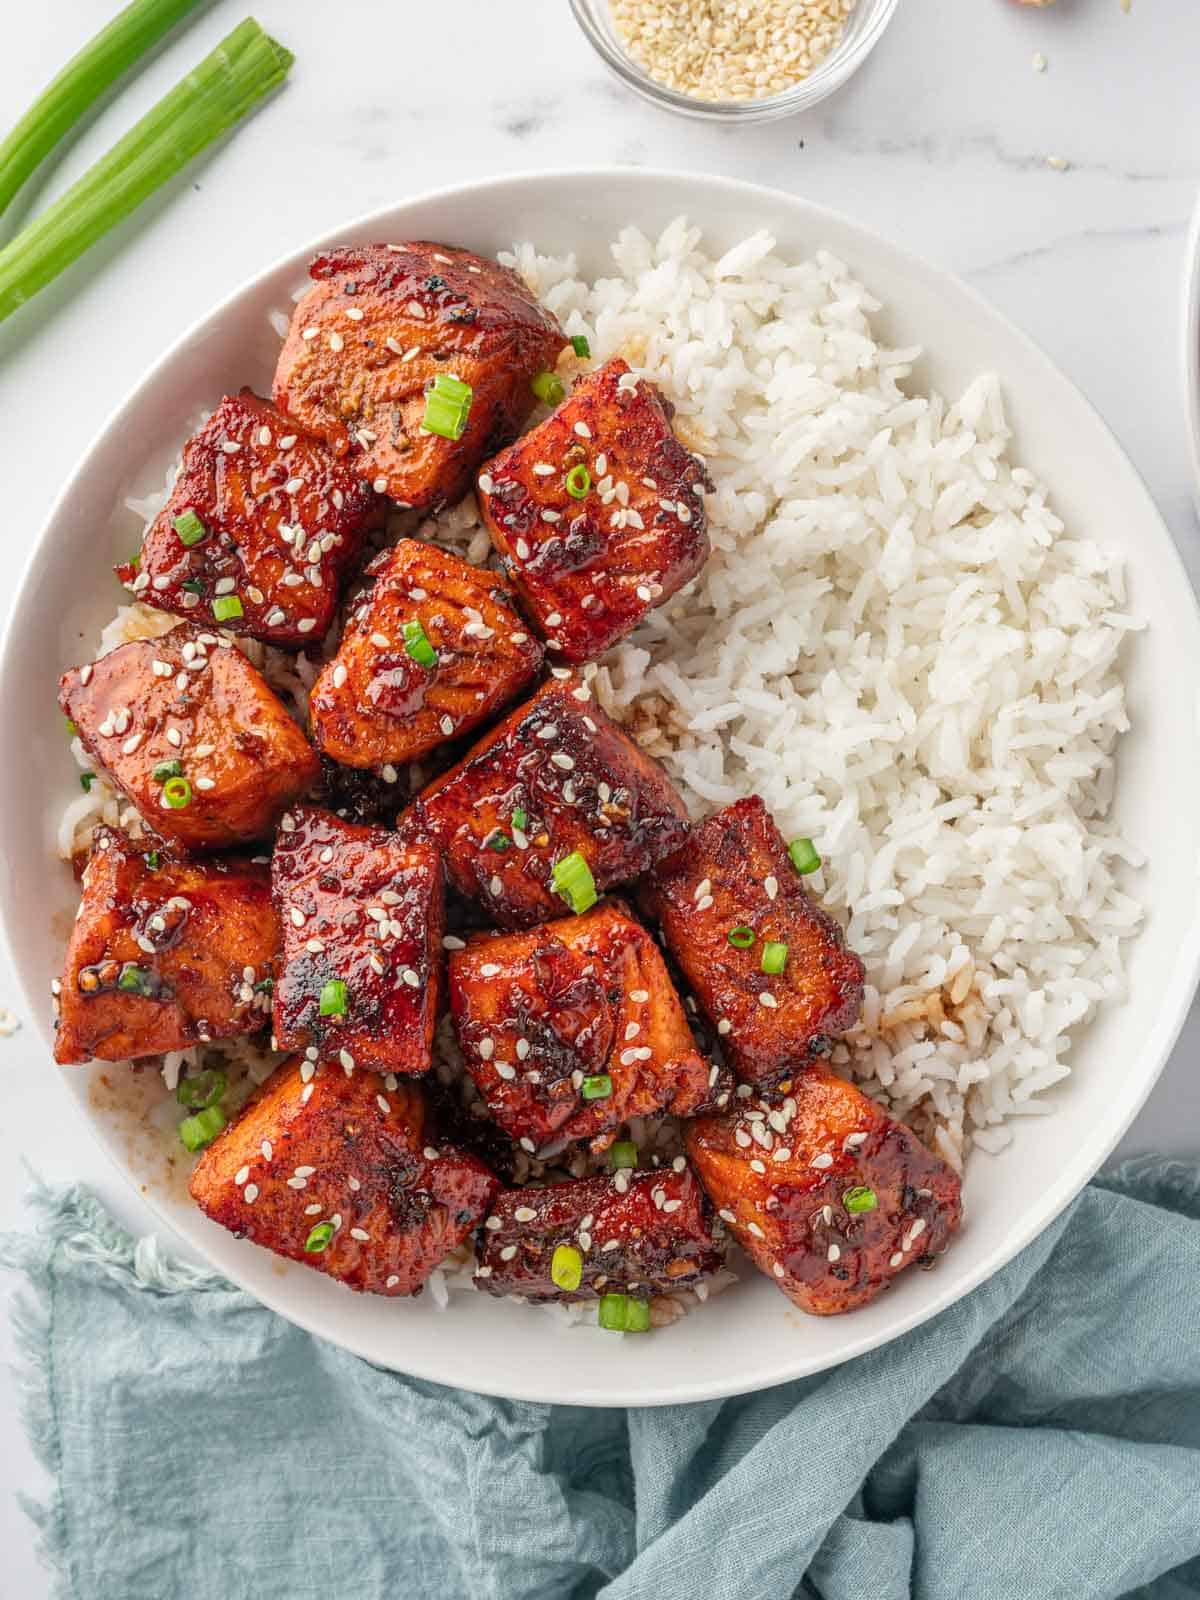 Honey garlic salmon in a bowl with white rice.